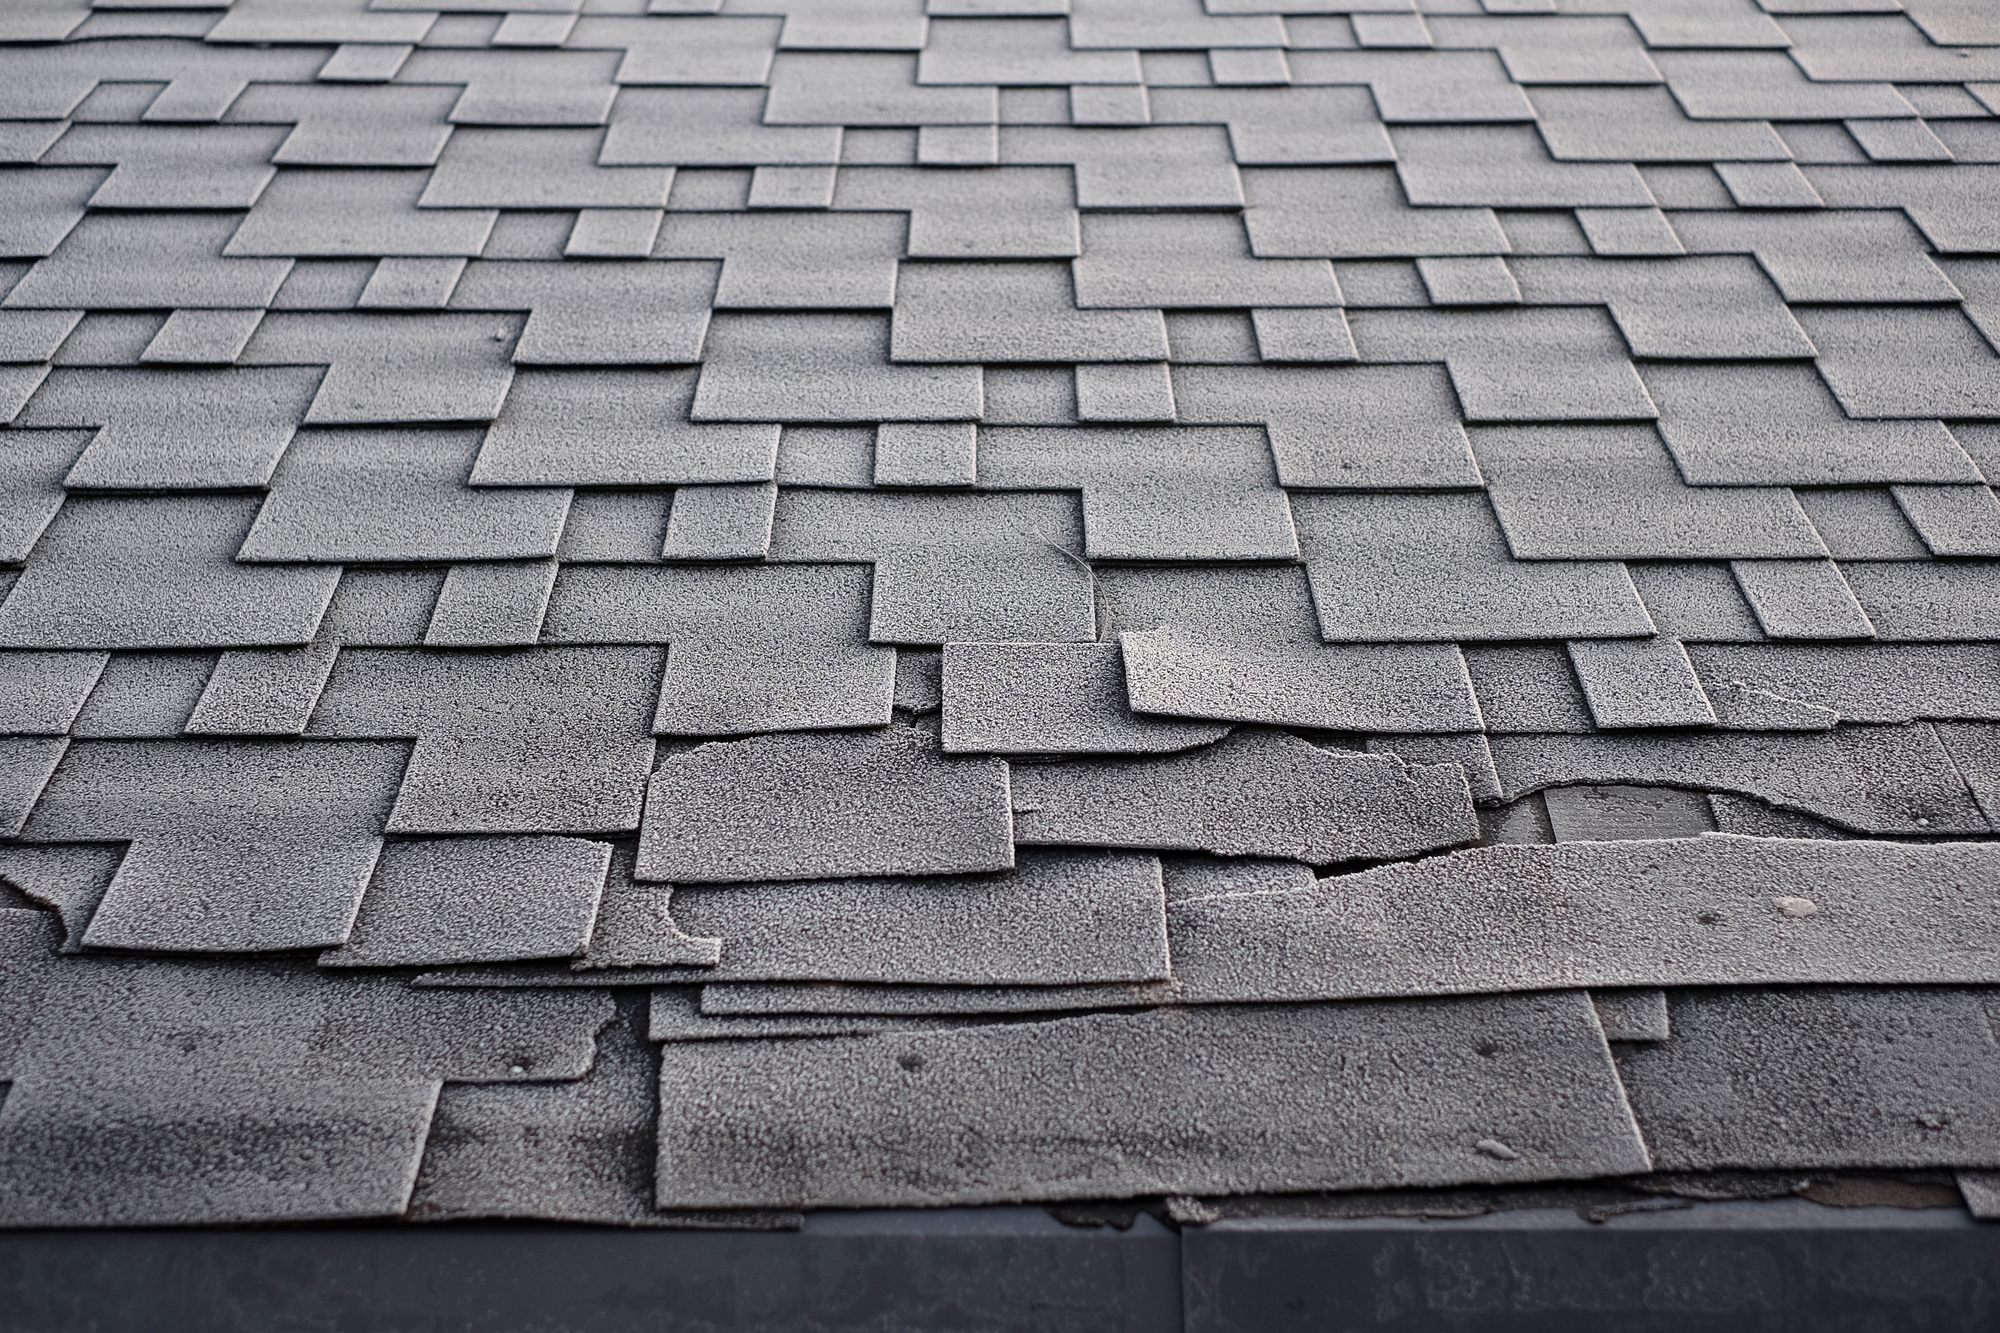 Shingles roof damage covered with frost. Close up view on Asphalt Roofing Shingles Background. Roof Shingles - Roofing